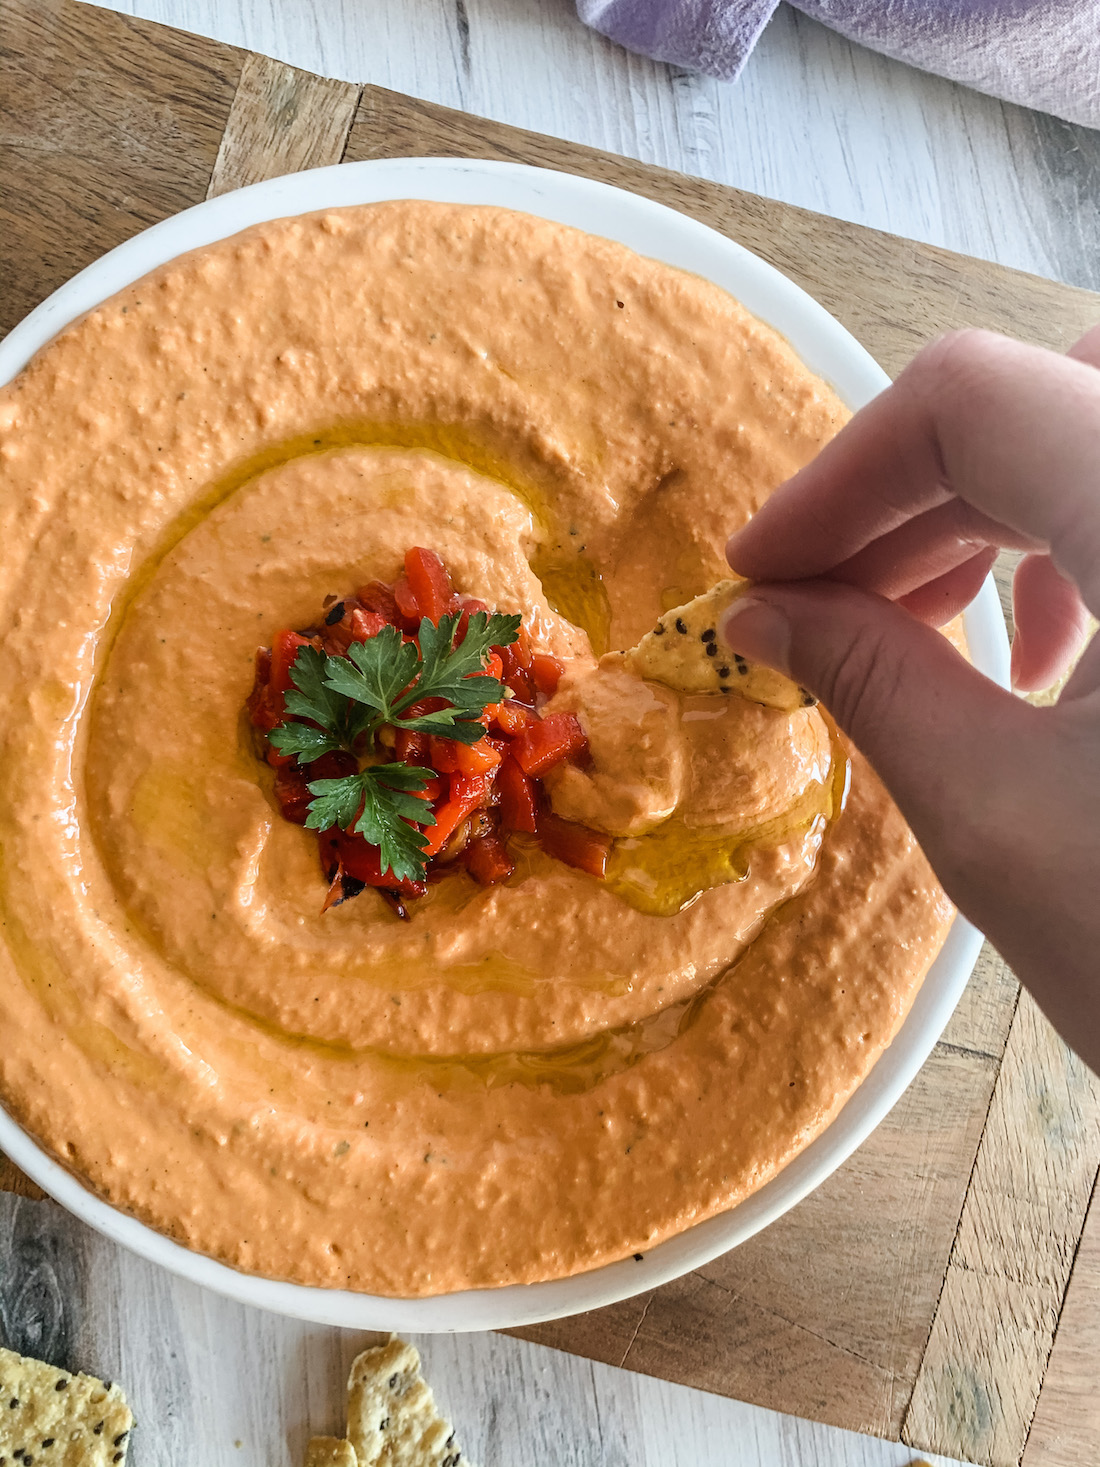 Chip Dipping into Roasted Red Pepper Hummus